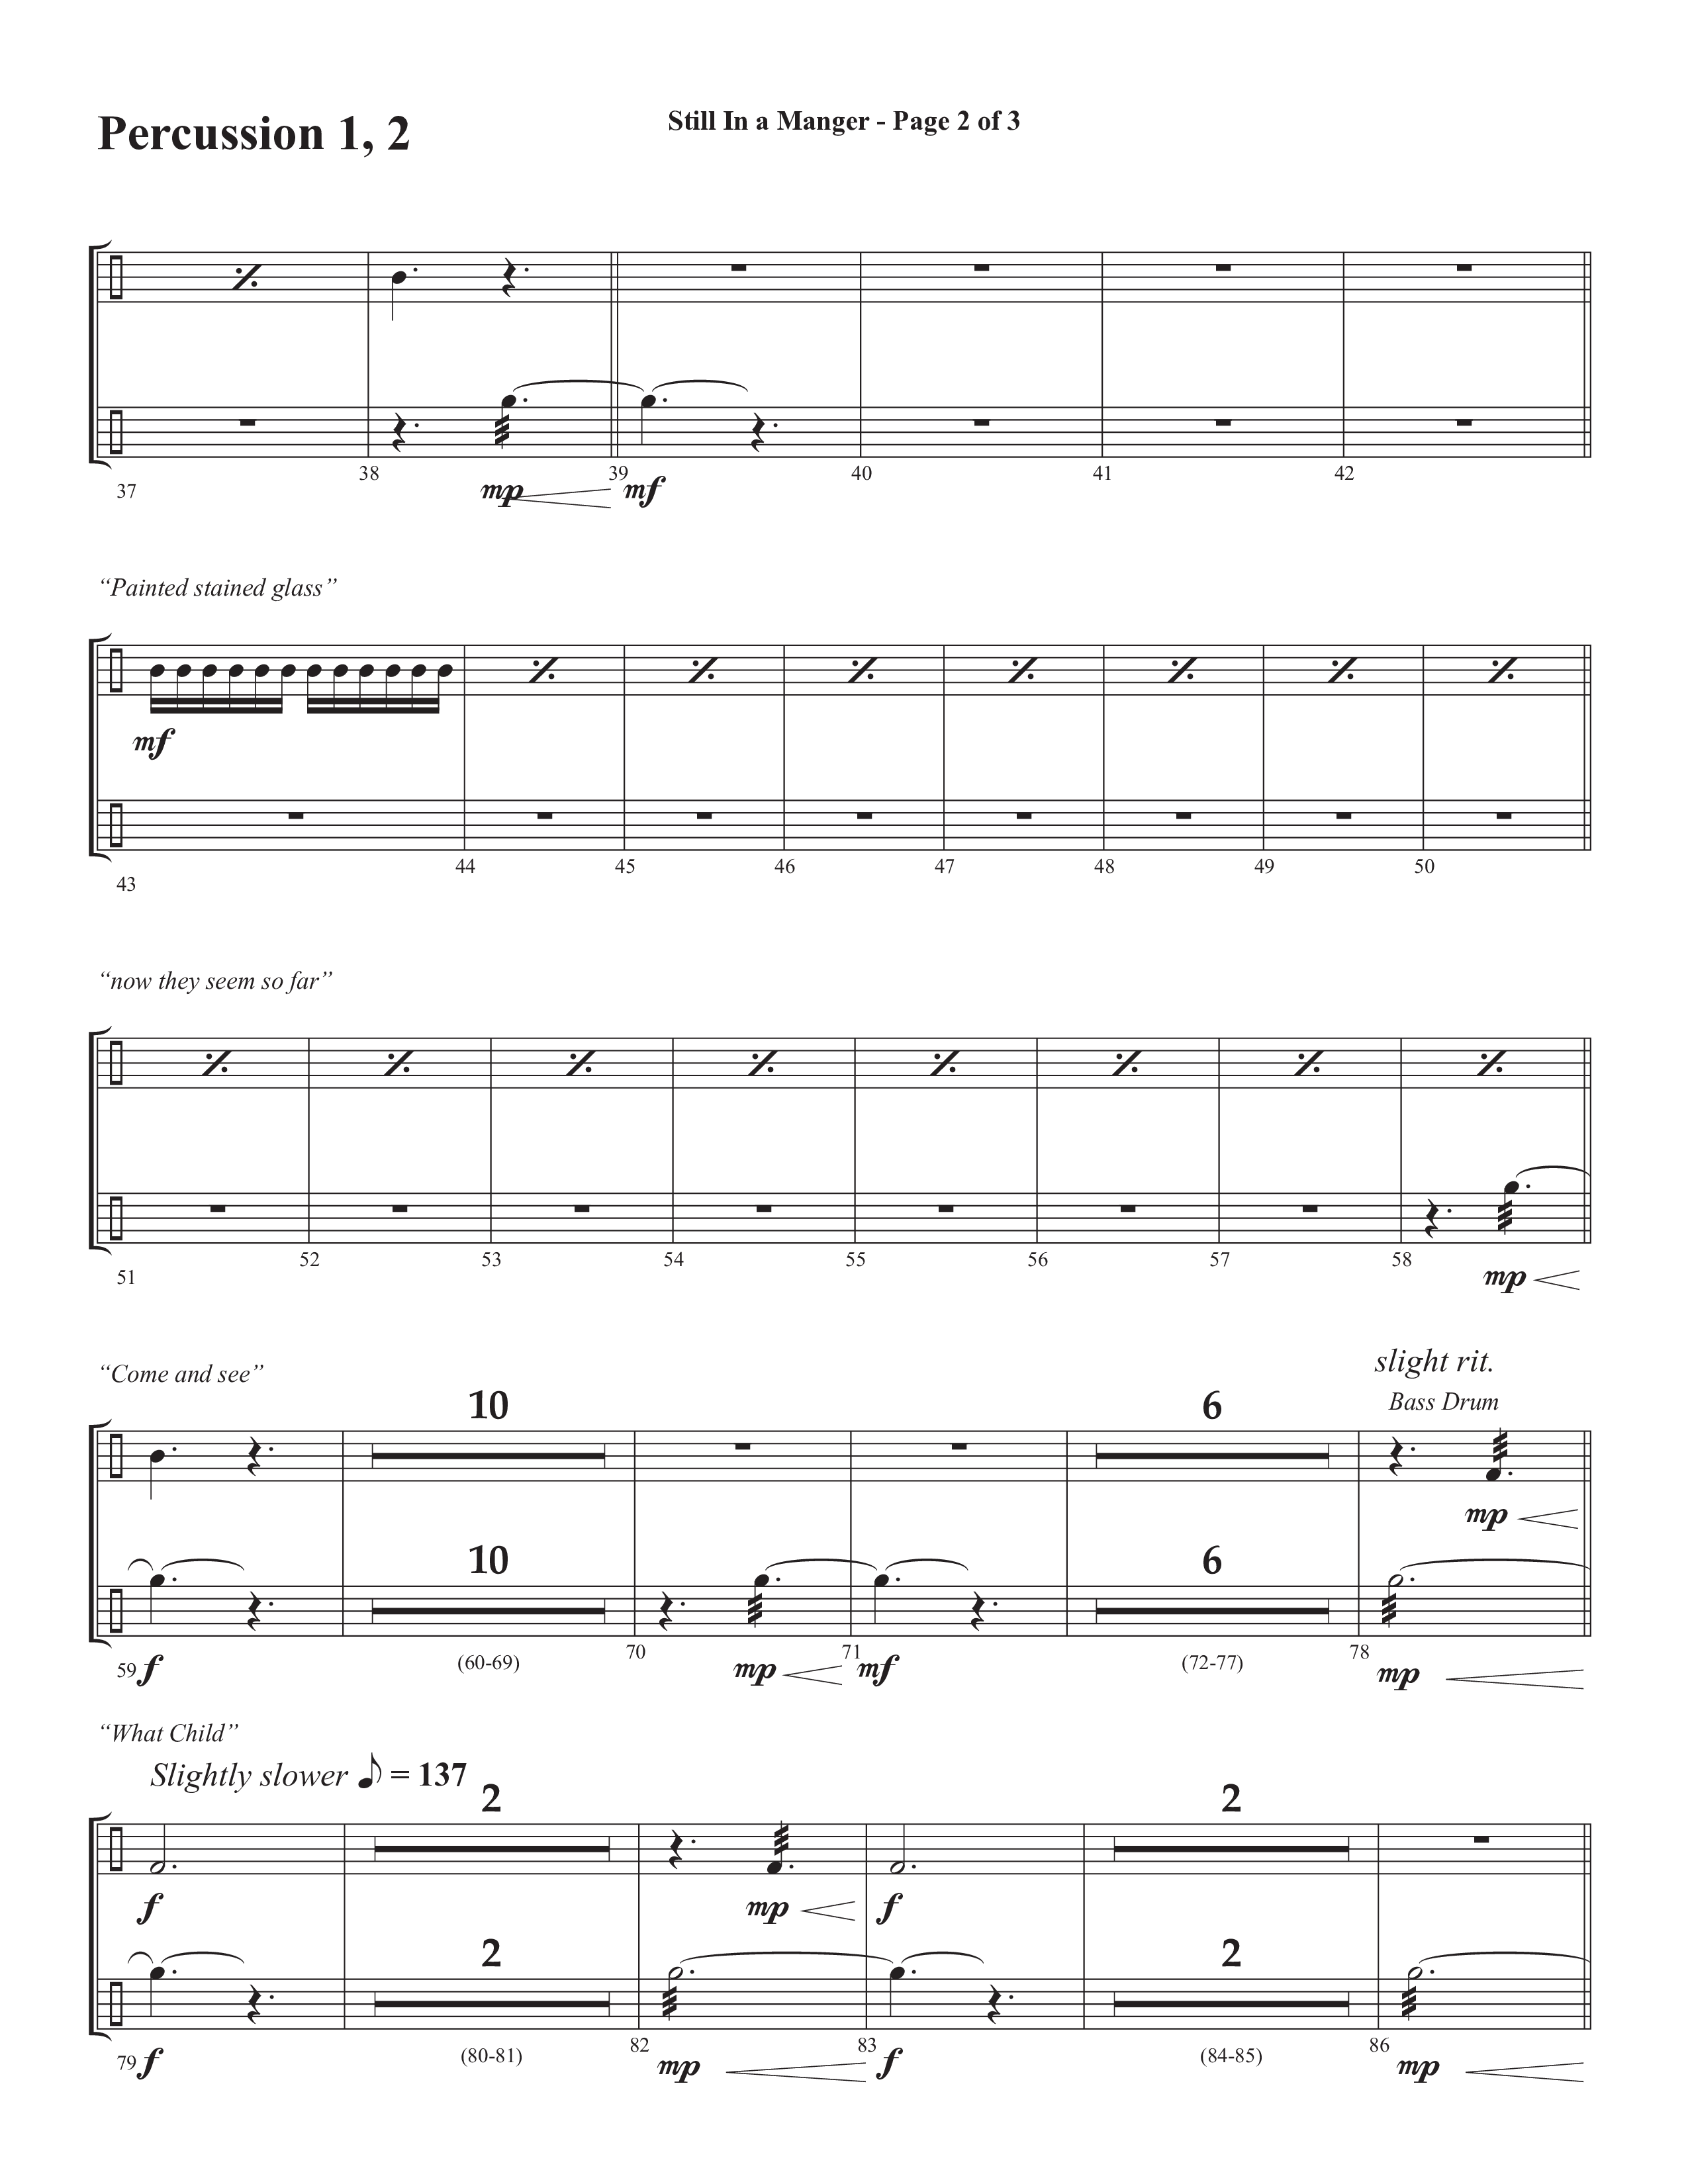 Still In A Manger with What Child Is This (Choral Anthem SATB) Percussion 1/2 (Semsen Music / Arr. Daniel Semsen)